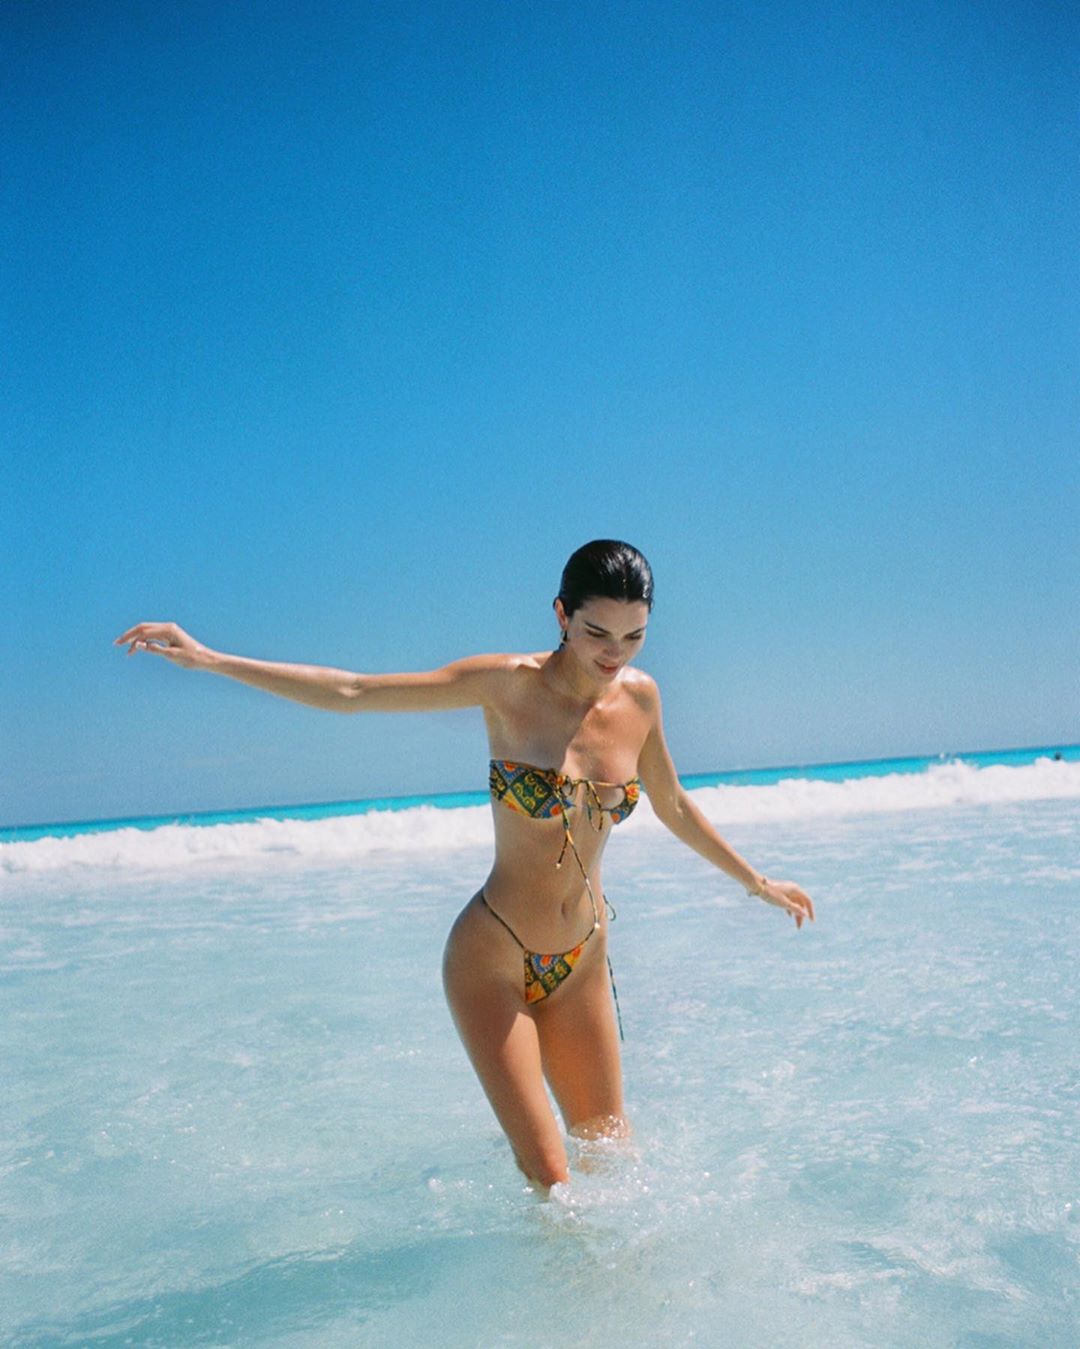 NBA WAG Kendall Jenner is On Vacation! - Photo 43